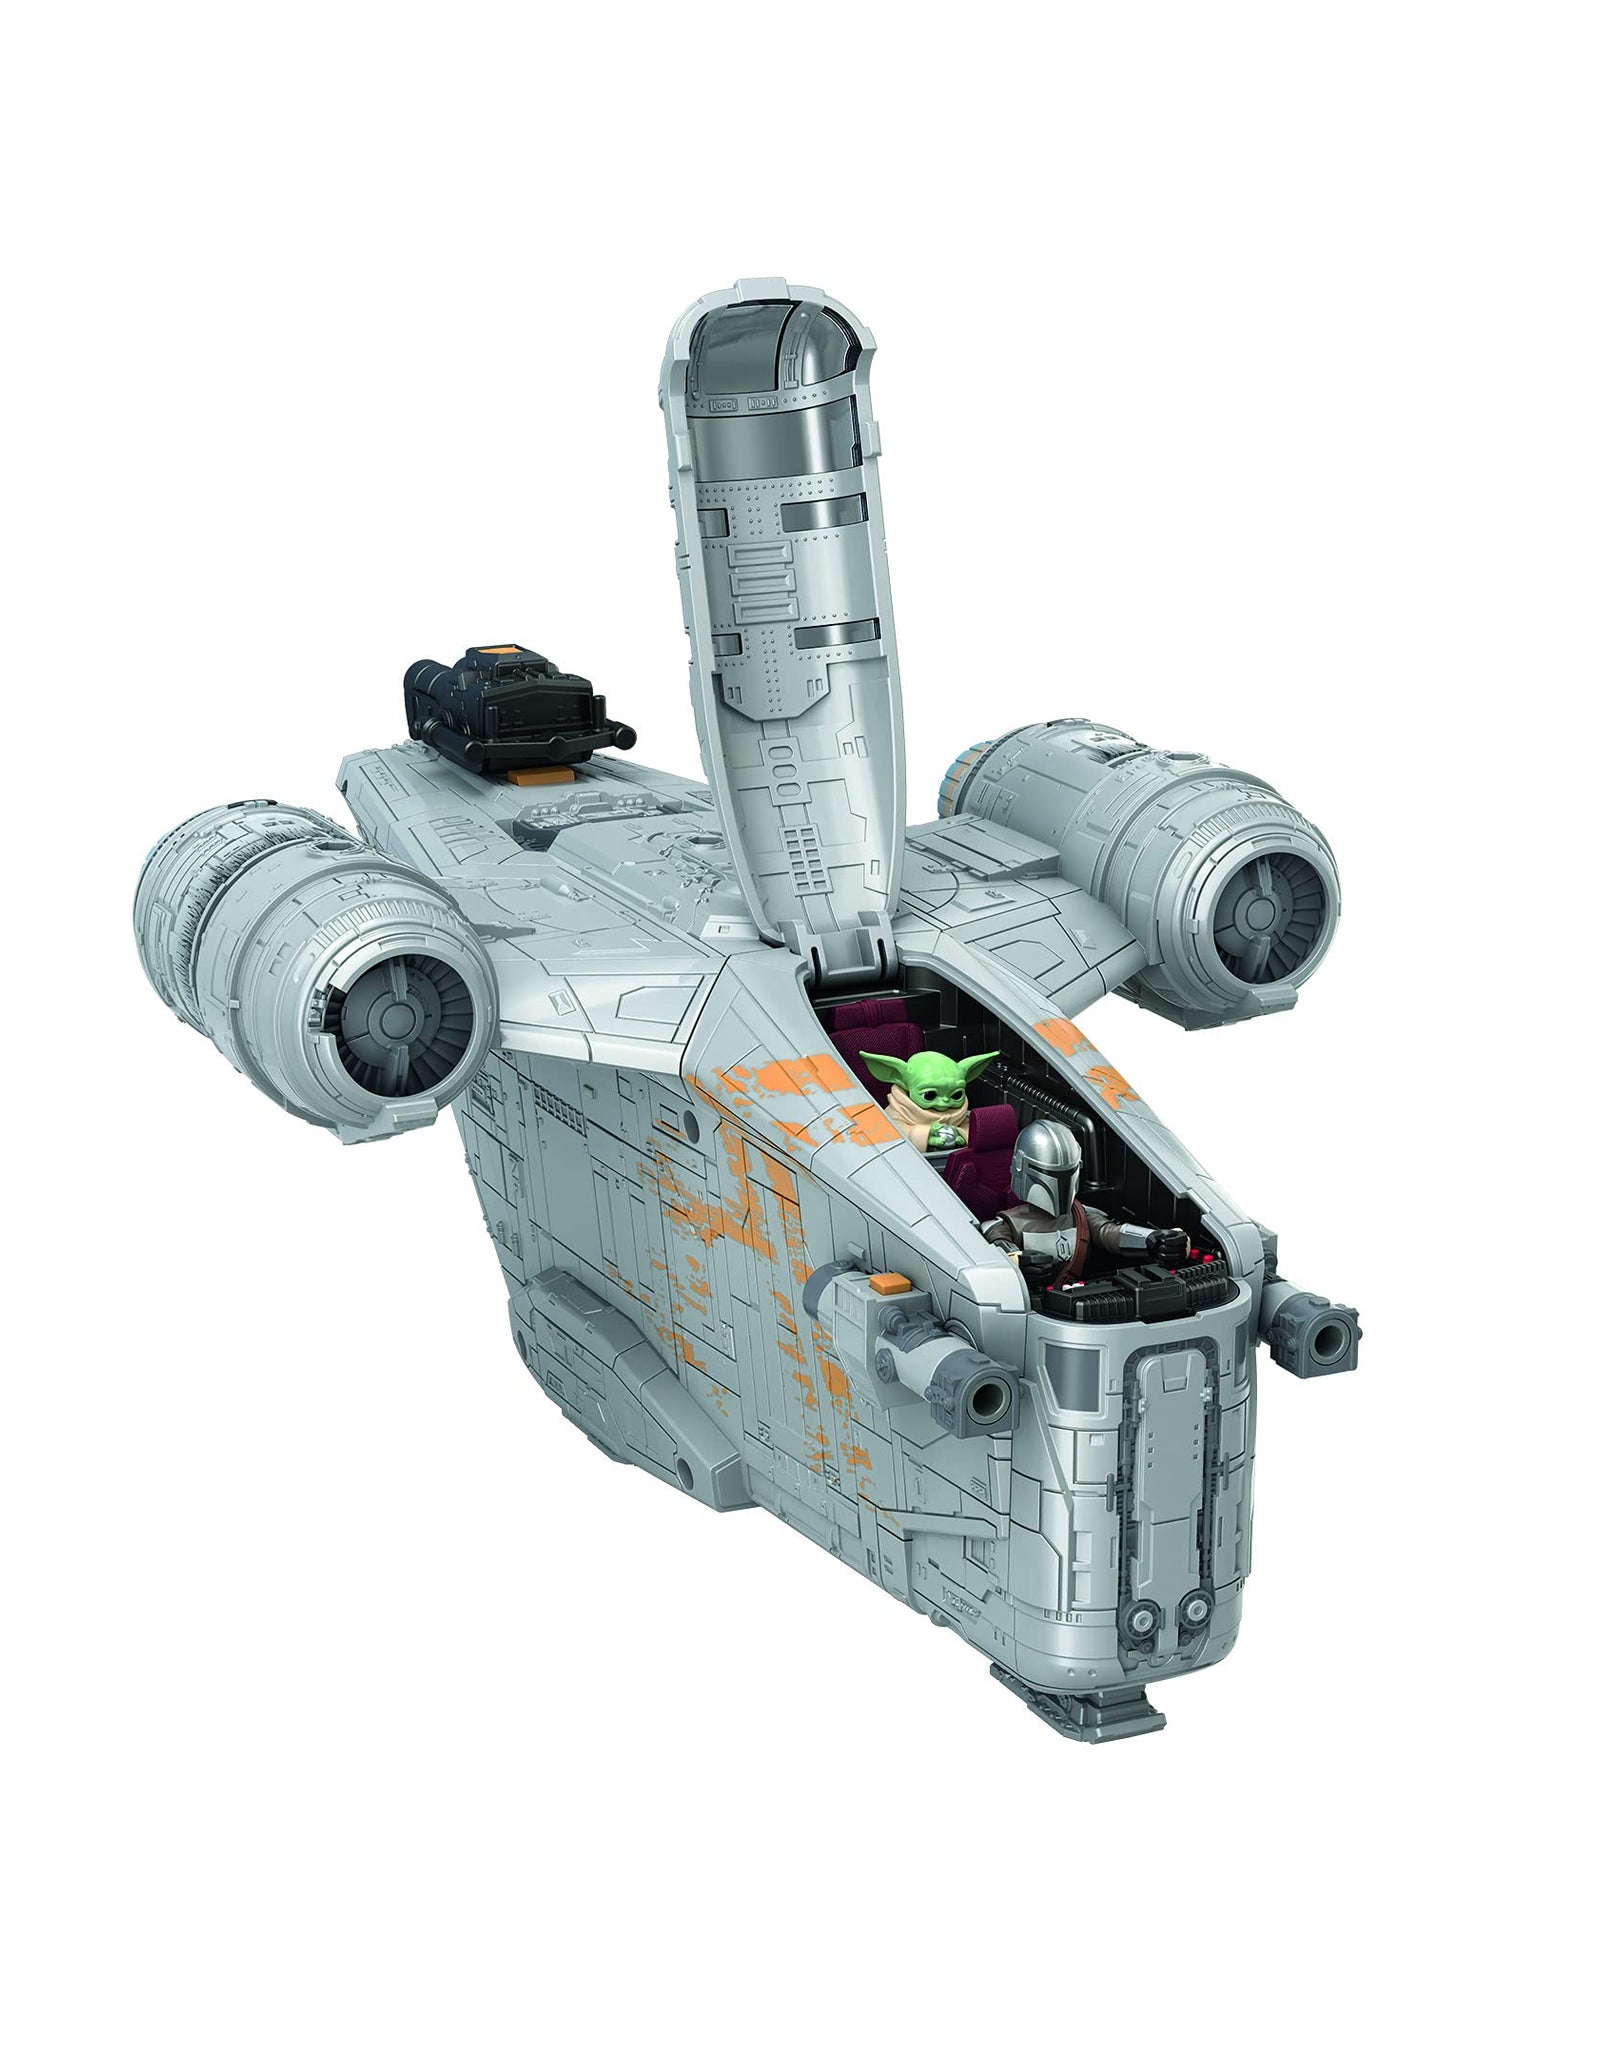 Star Wars Mission Fleet The Mandalorian The Child Razor Crest Outer Rim Run Deluxe Vehicle with 2.5-Inch-Scale Figure, for Kids Ages 4 and Up,F0589